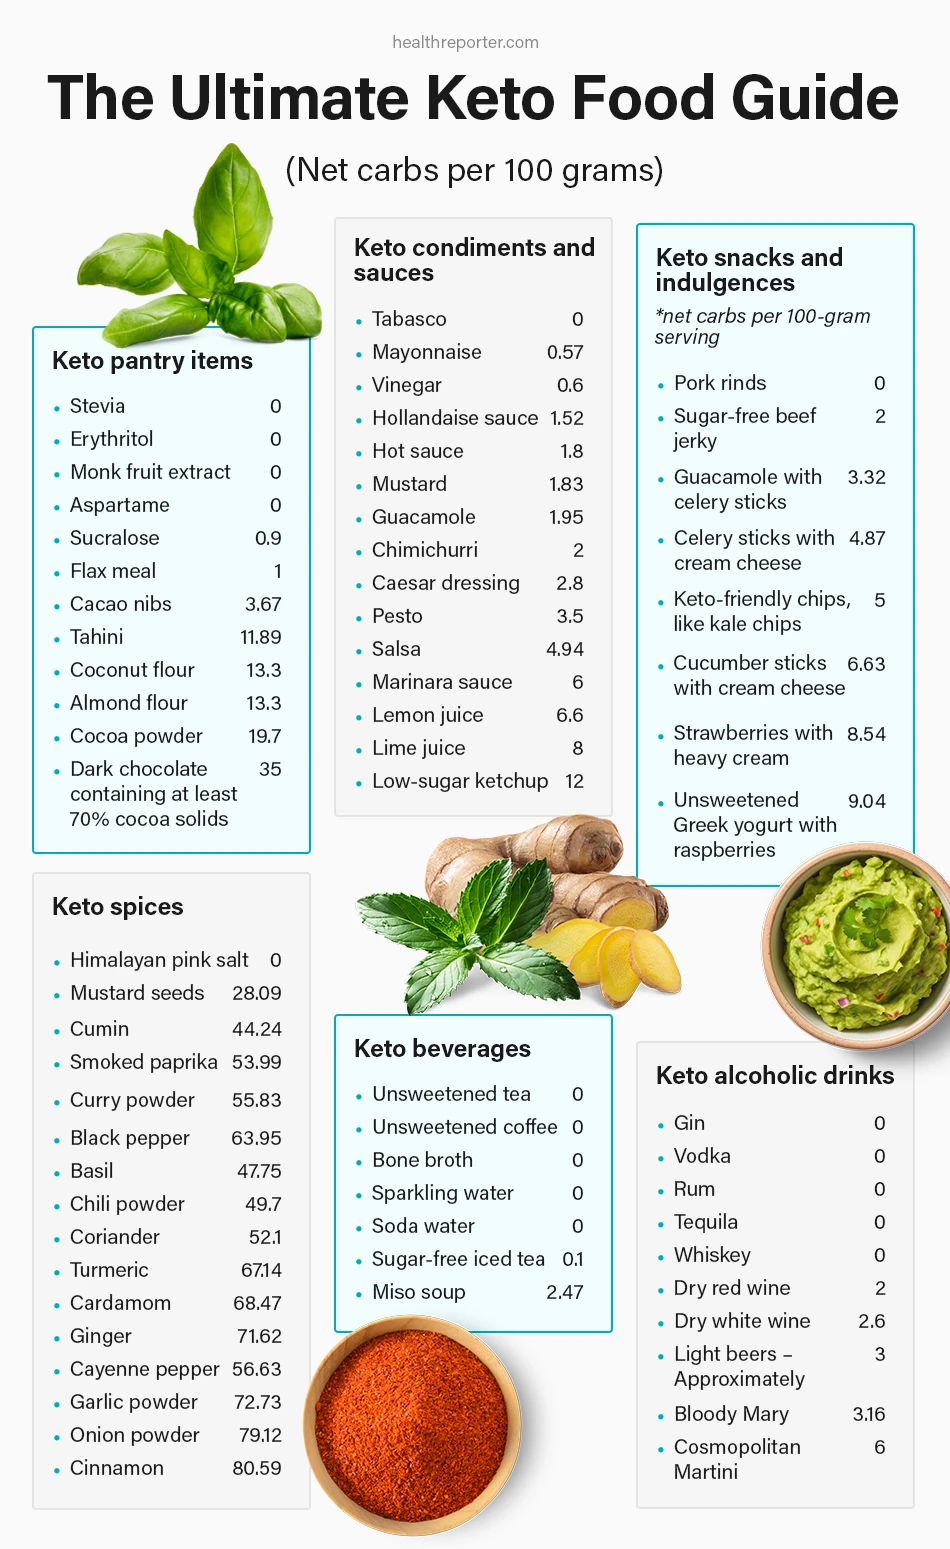 The Ultimate Keto Food Guide